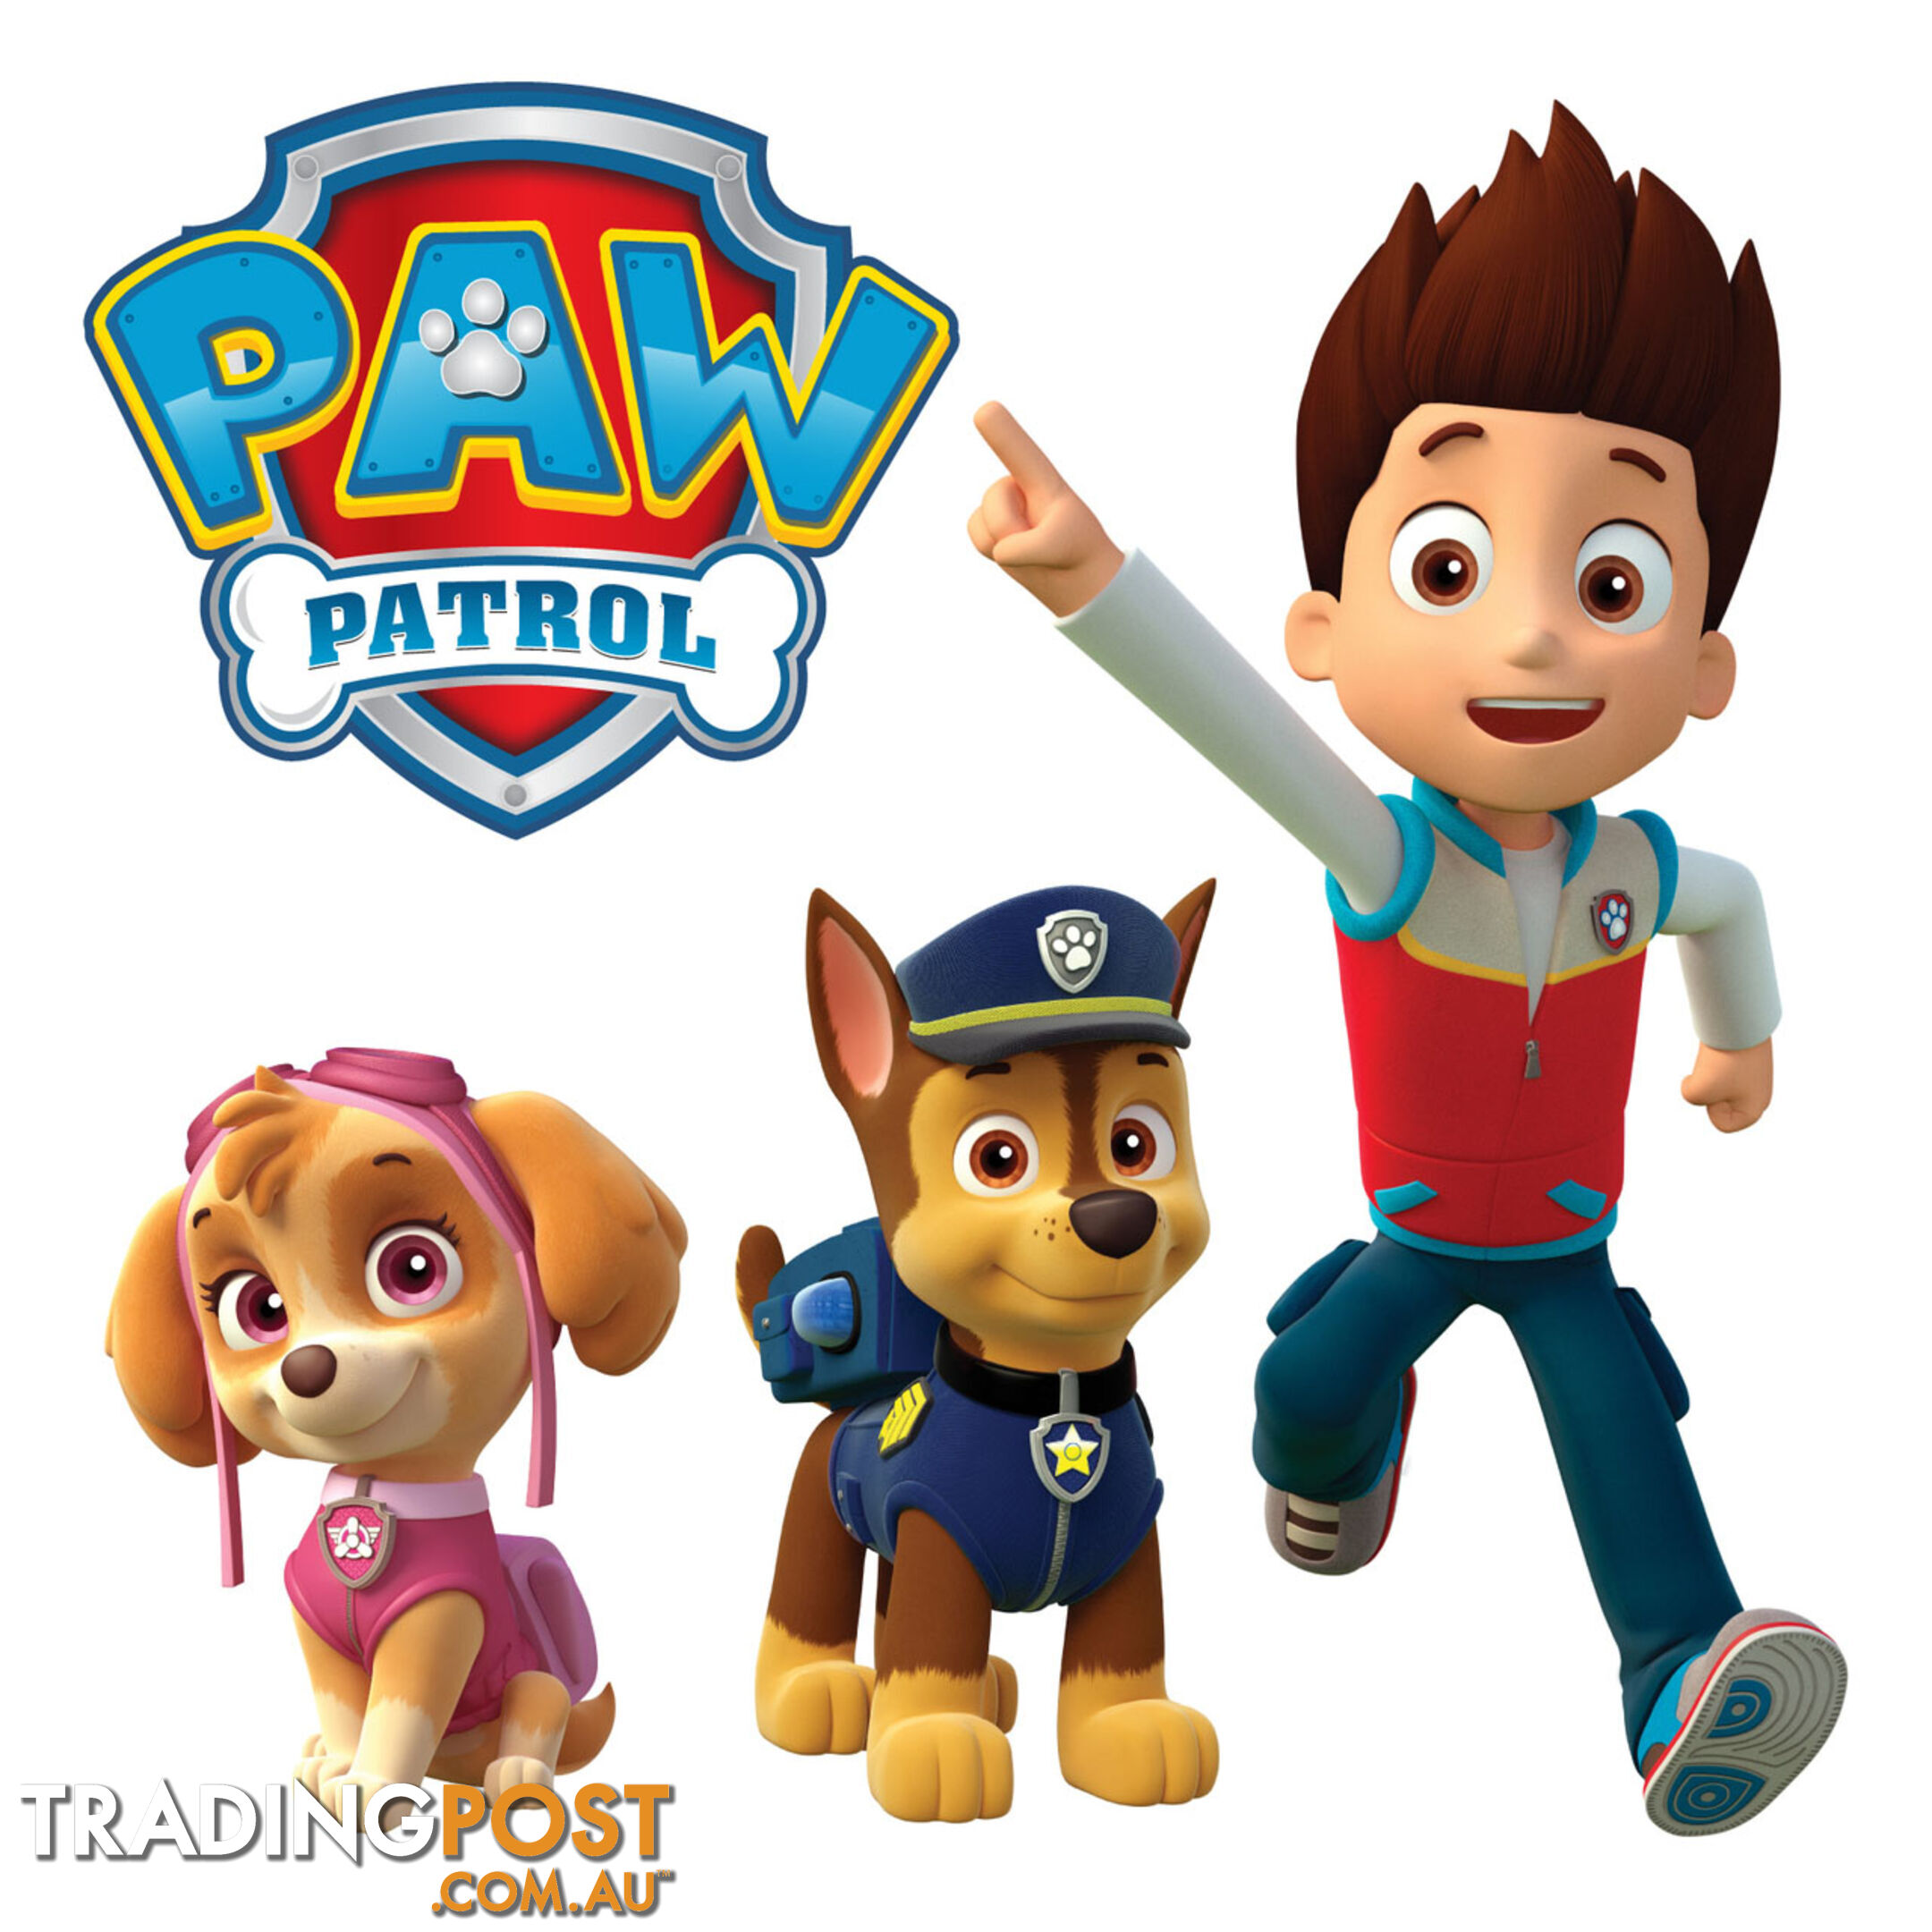 10 X Paw Patrol Wall Stickers - Totally Movable and Reusable